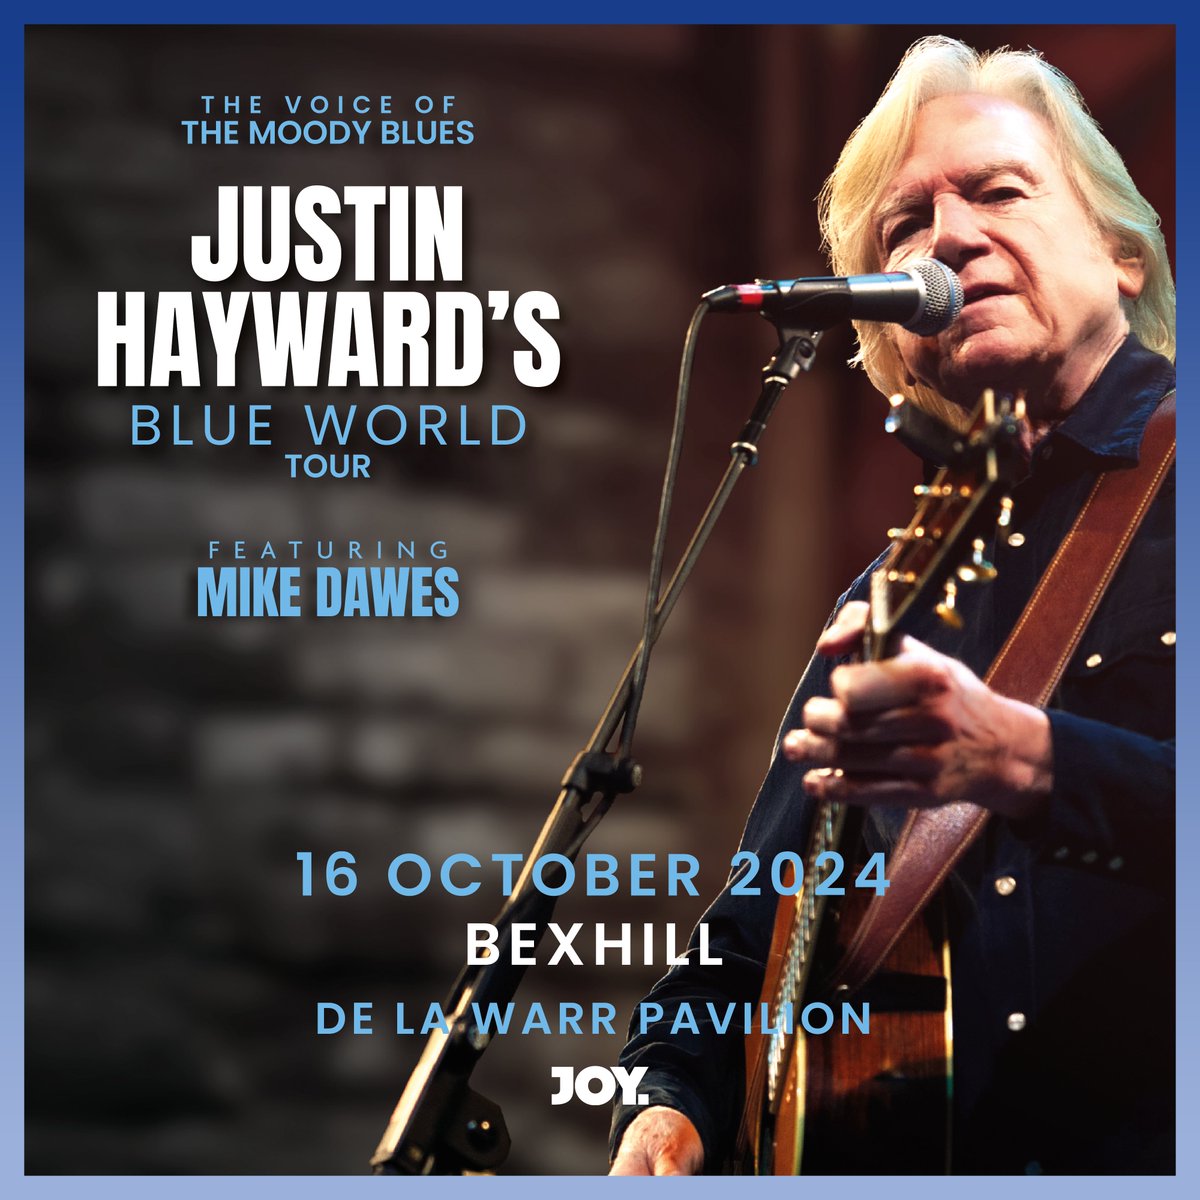 ON SALE NOW 🔊 Justin Hayward - The Voice of The Moody Blues + special guest Mike Dawes 🎟 bit.ly/3U1iRvM Get tickets for Justin Hayward's Blue World Tour at De La Warr Pavilion, Bexhill on oct 16th.